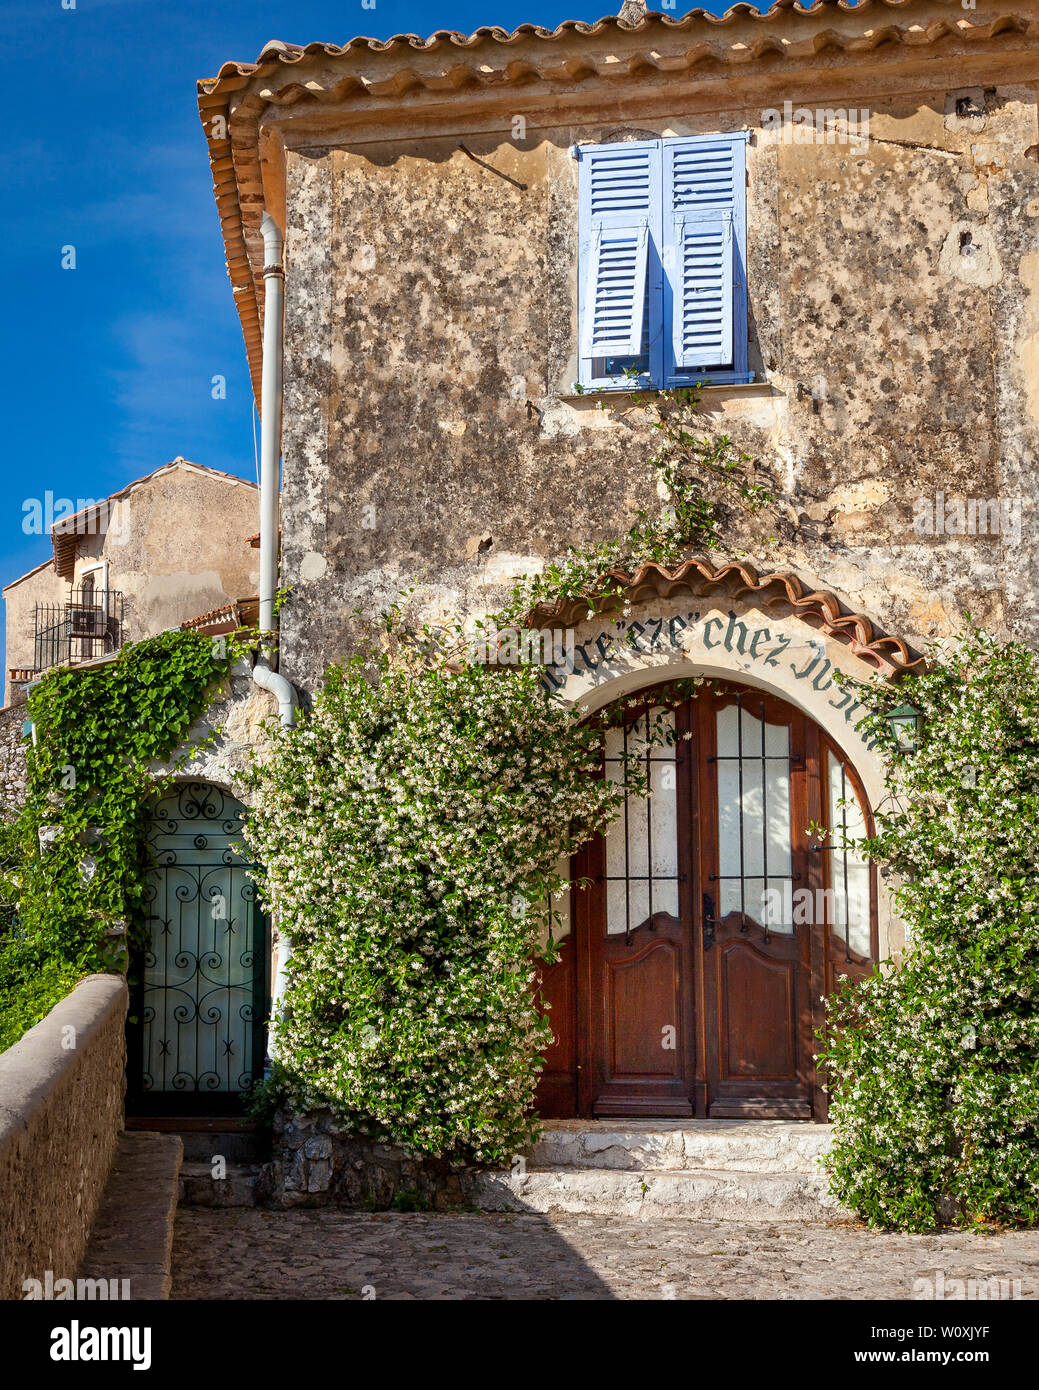 Jasmine framed arched doorway in medieval village of Eze, Provence, France Stock Photo